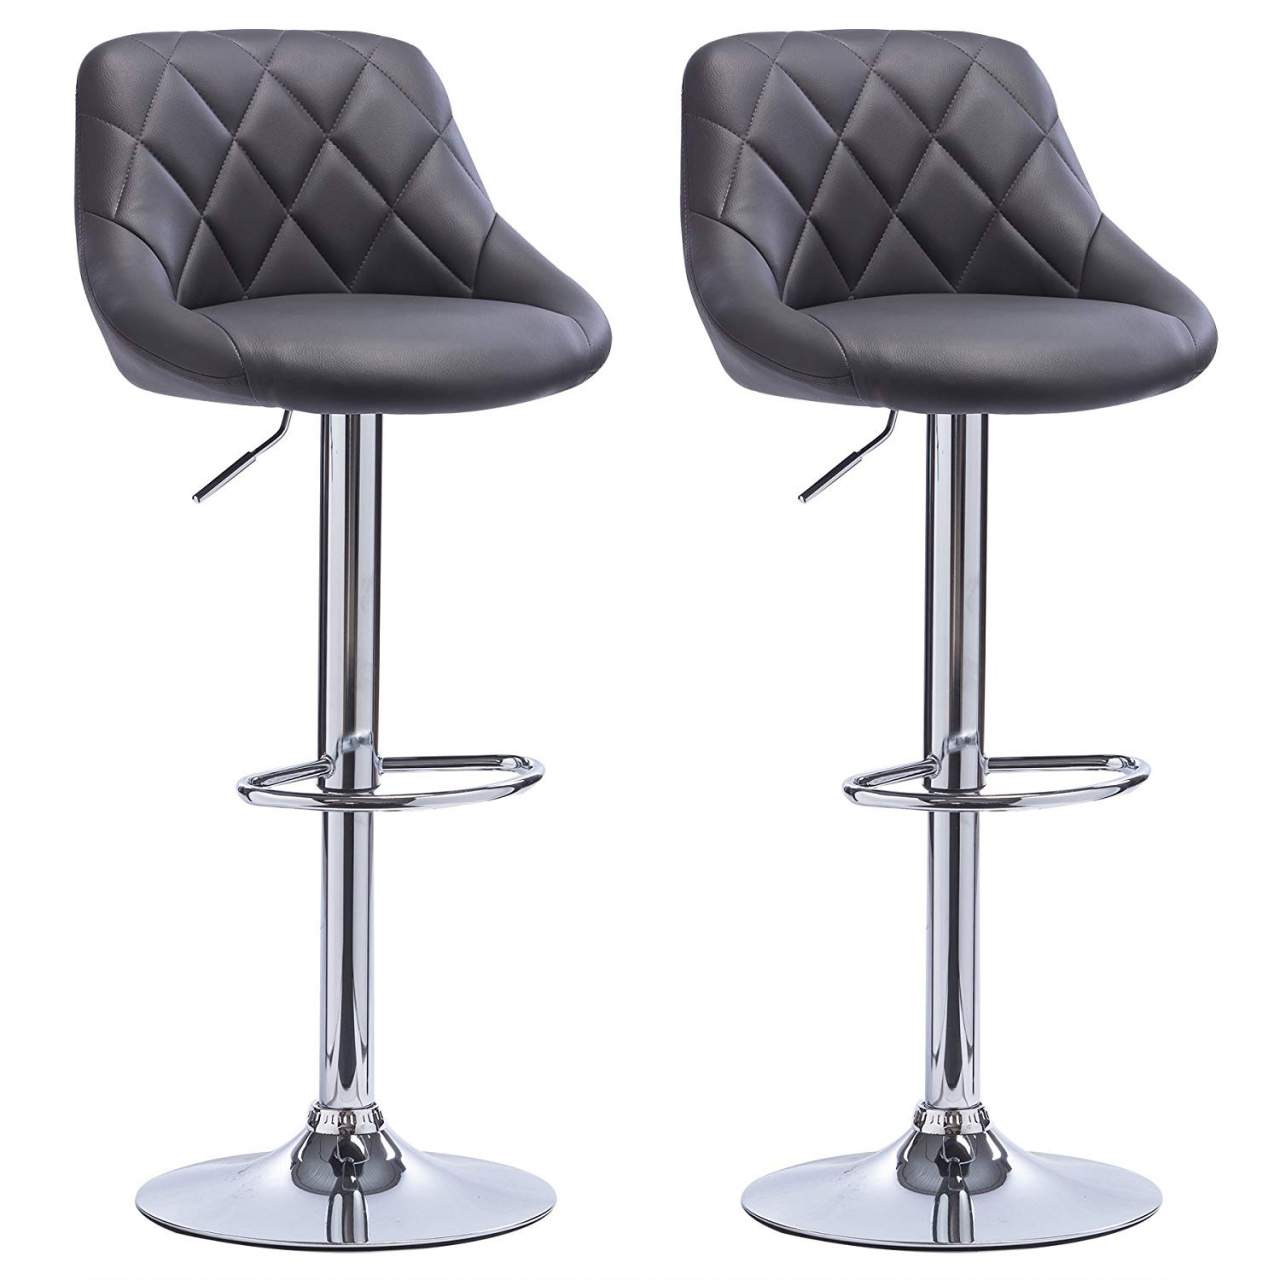 WOLTU Bar Stools Grey Bar Chairs Breakfast Dining Stools for Kitchen Island Counter Bar Stools Set of 2 pcs Faux Leather Exterior/Adjustable Swivel Gas Lift/Chrome Steel Footrest & Base Classic Black 